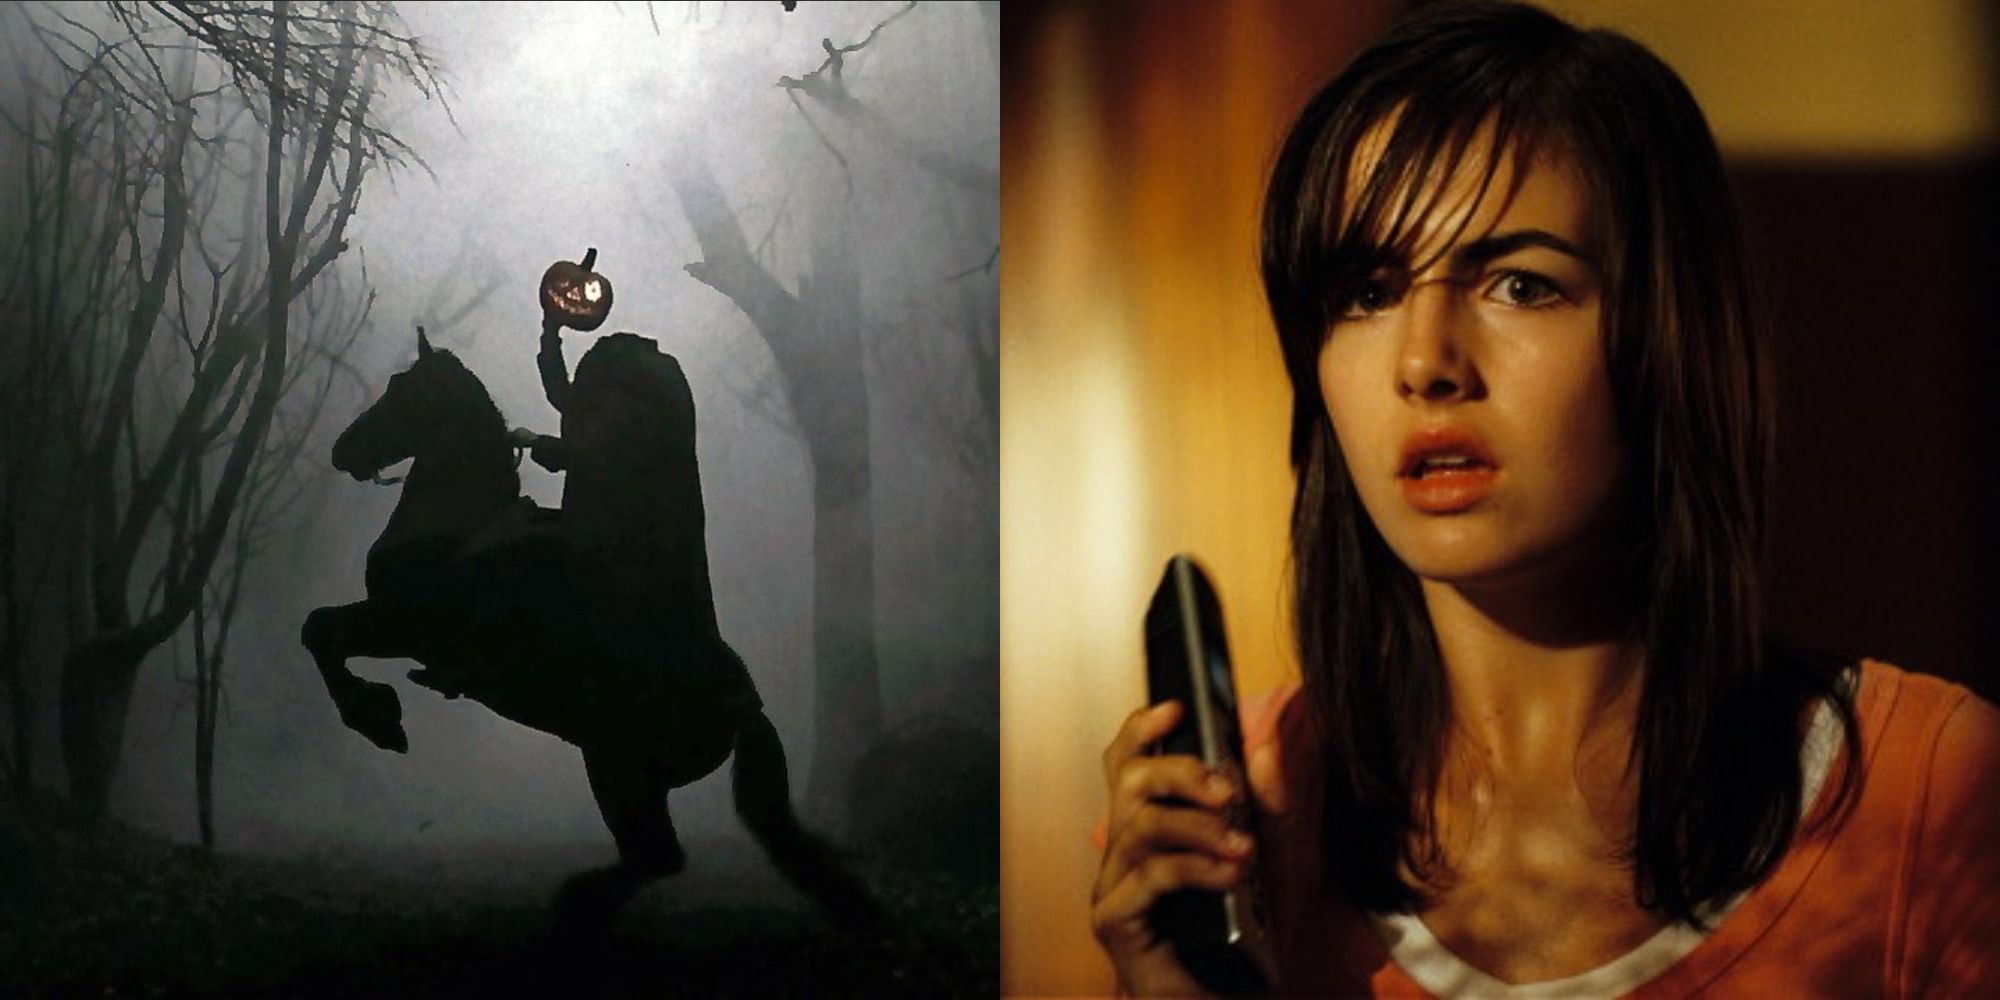 Split image showing the headless horseman from Sleepy Hollow and Jil from When a Stranger Calls.